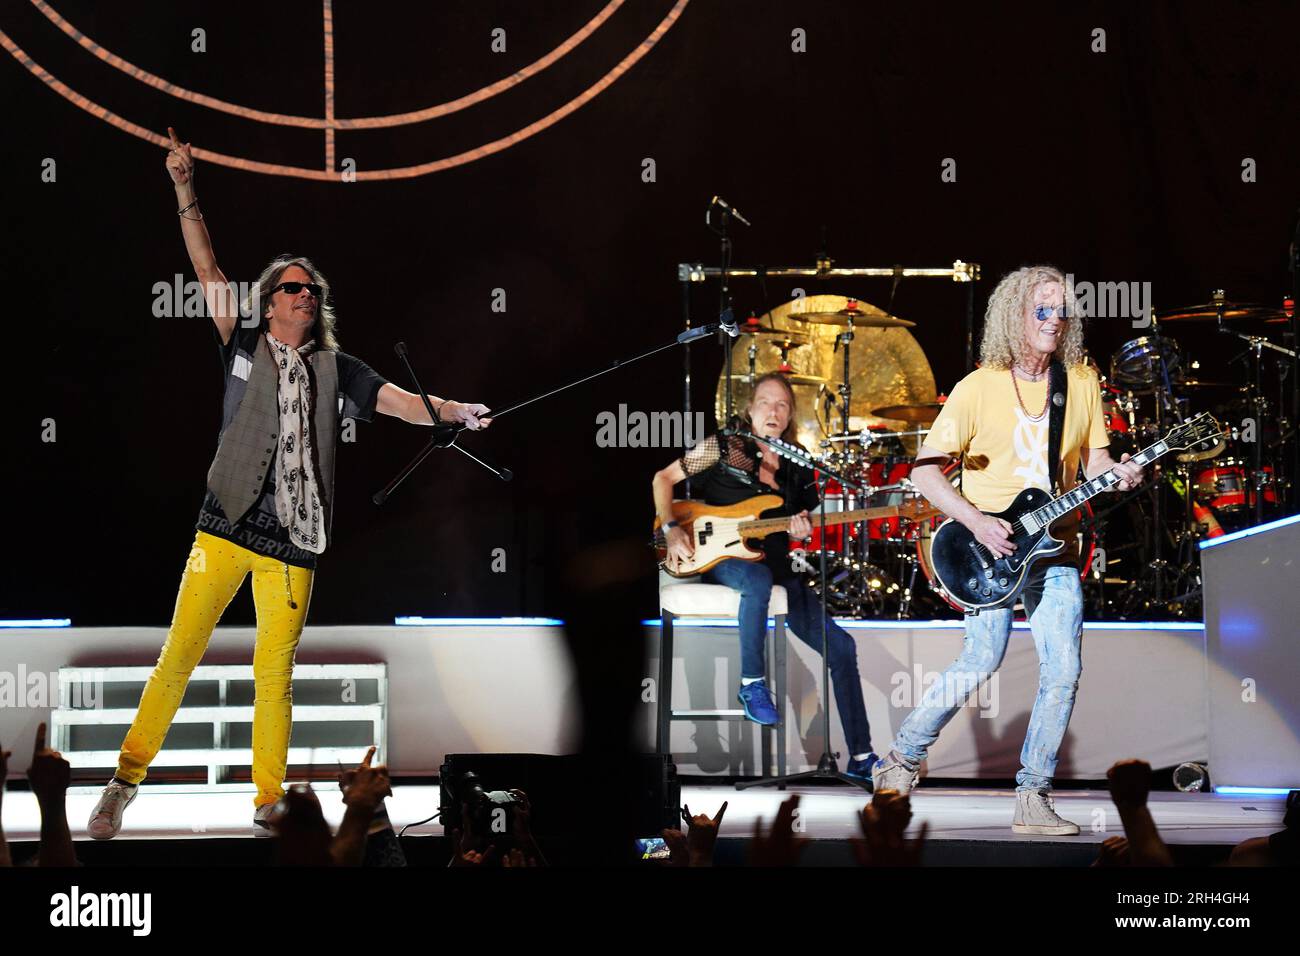 Dallas, United States. 11th Aug, 2023. August 11, 2023, Dallas, Texas, United States: Kelly Hansen and Bruce Watson, Members of the American rock band Foreigner perform on stage as part of their The Historic Farewell Tour at the Dos Equis Pavilion on Friday August 11, 2023 in Dallas, Texas, United States. (Photo by Javier Vicencio/Eyepix Group) Credit: Eyepix Group/Alamy Live News Stock Photo